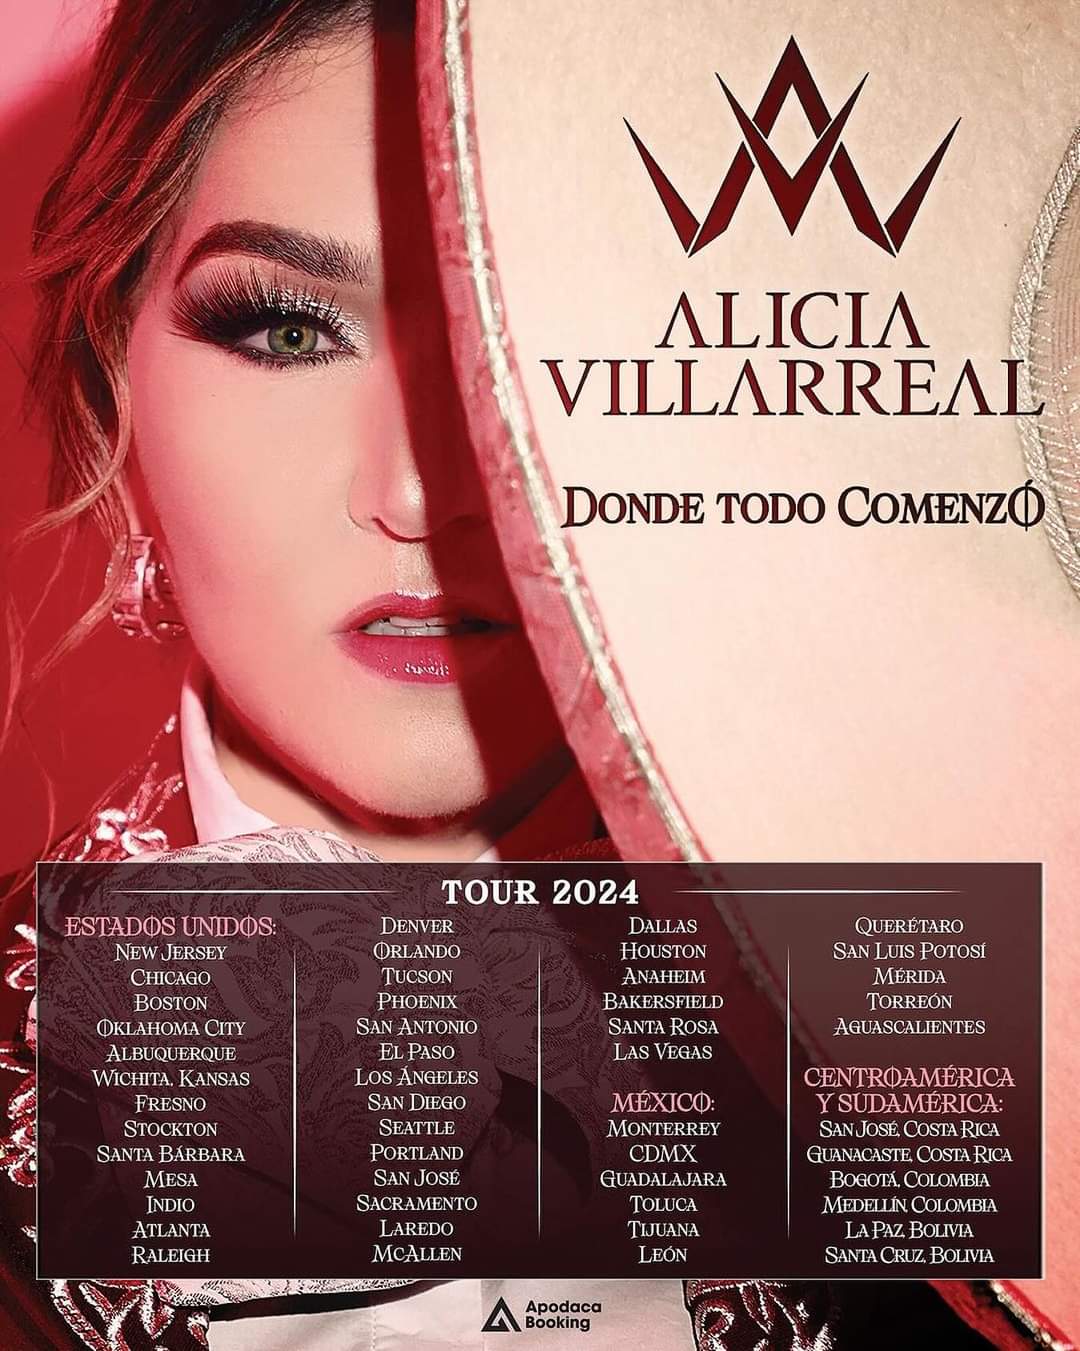 Mexico singer Alicia Villarreal to stop in Laredo as part of 2024 tour